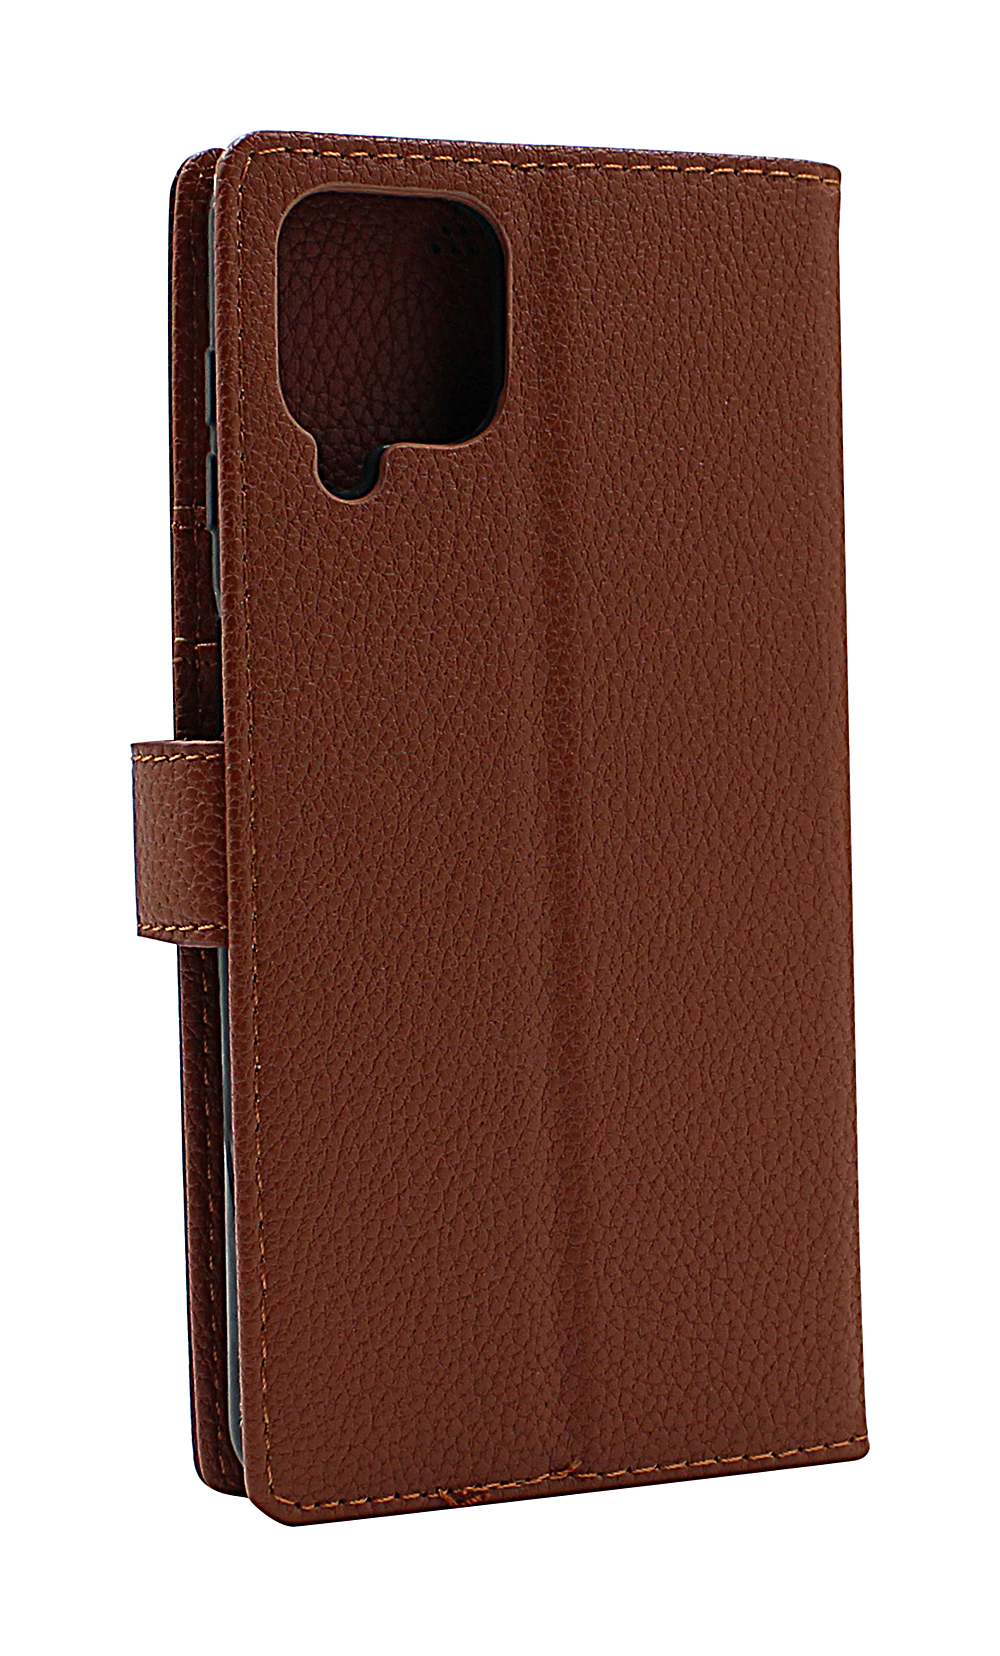 New Standcase Wallet Samsung Galaxy A22 (SM-A225F/DS)